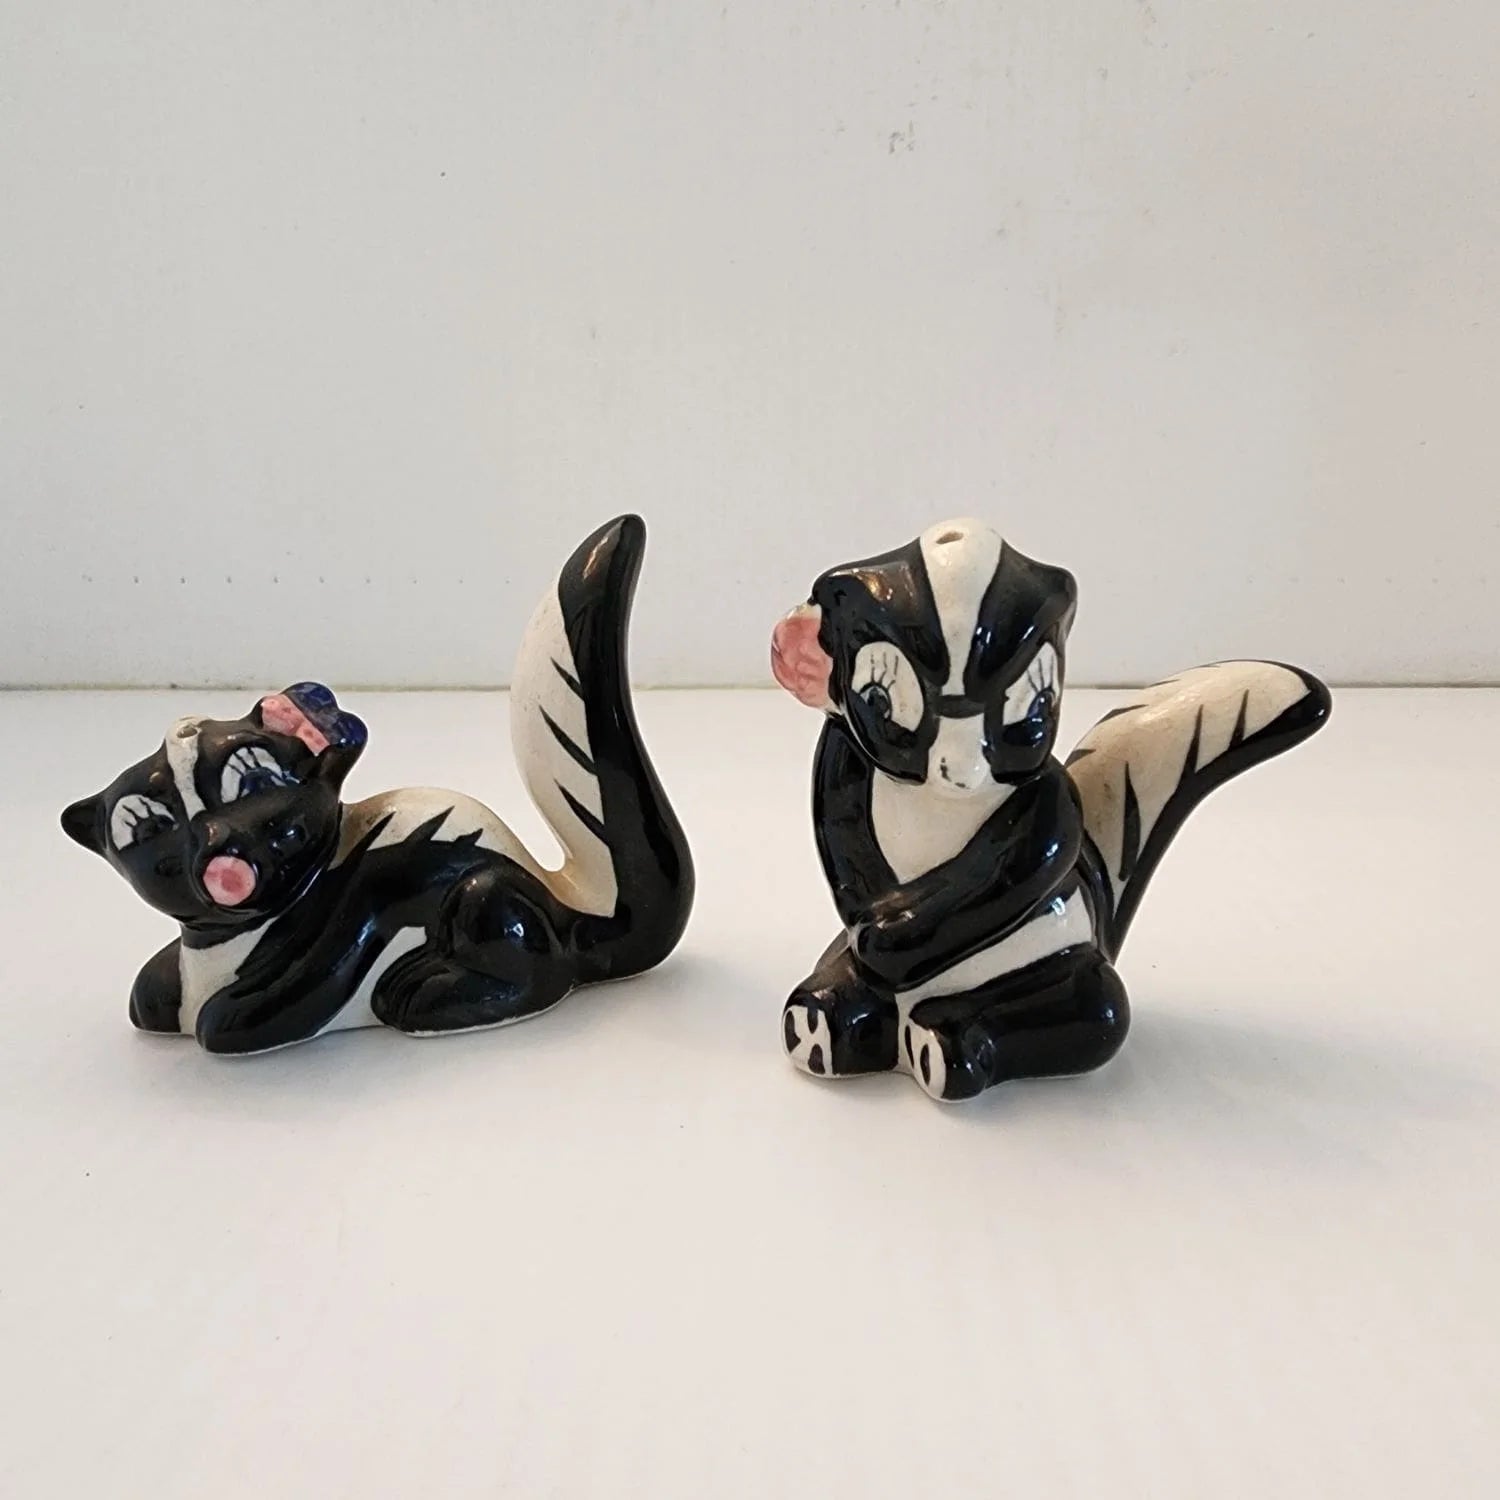 Two ceramic animals, one black and one white, sitting on a table.